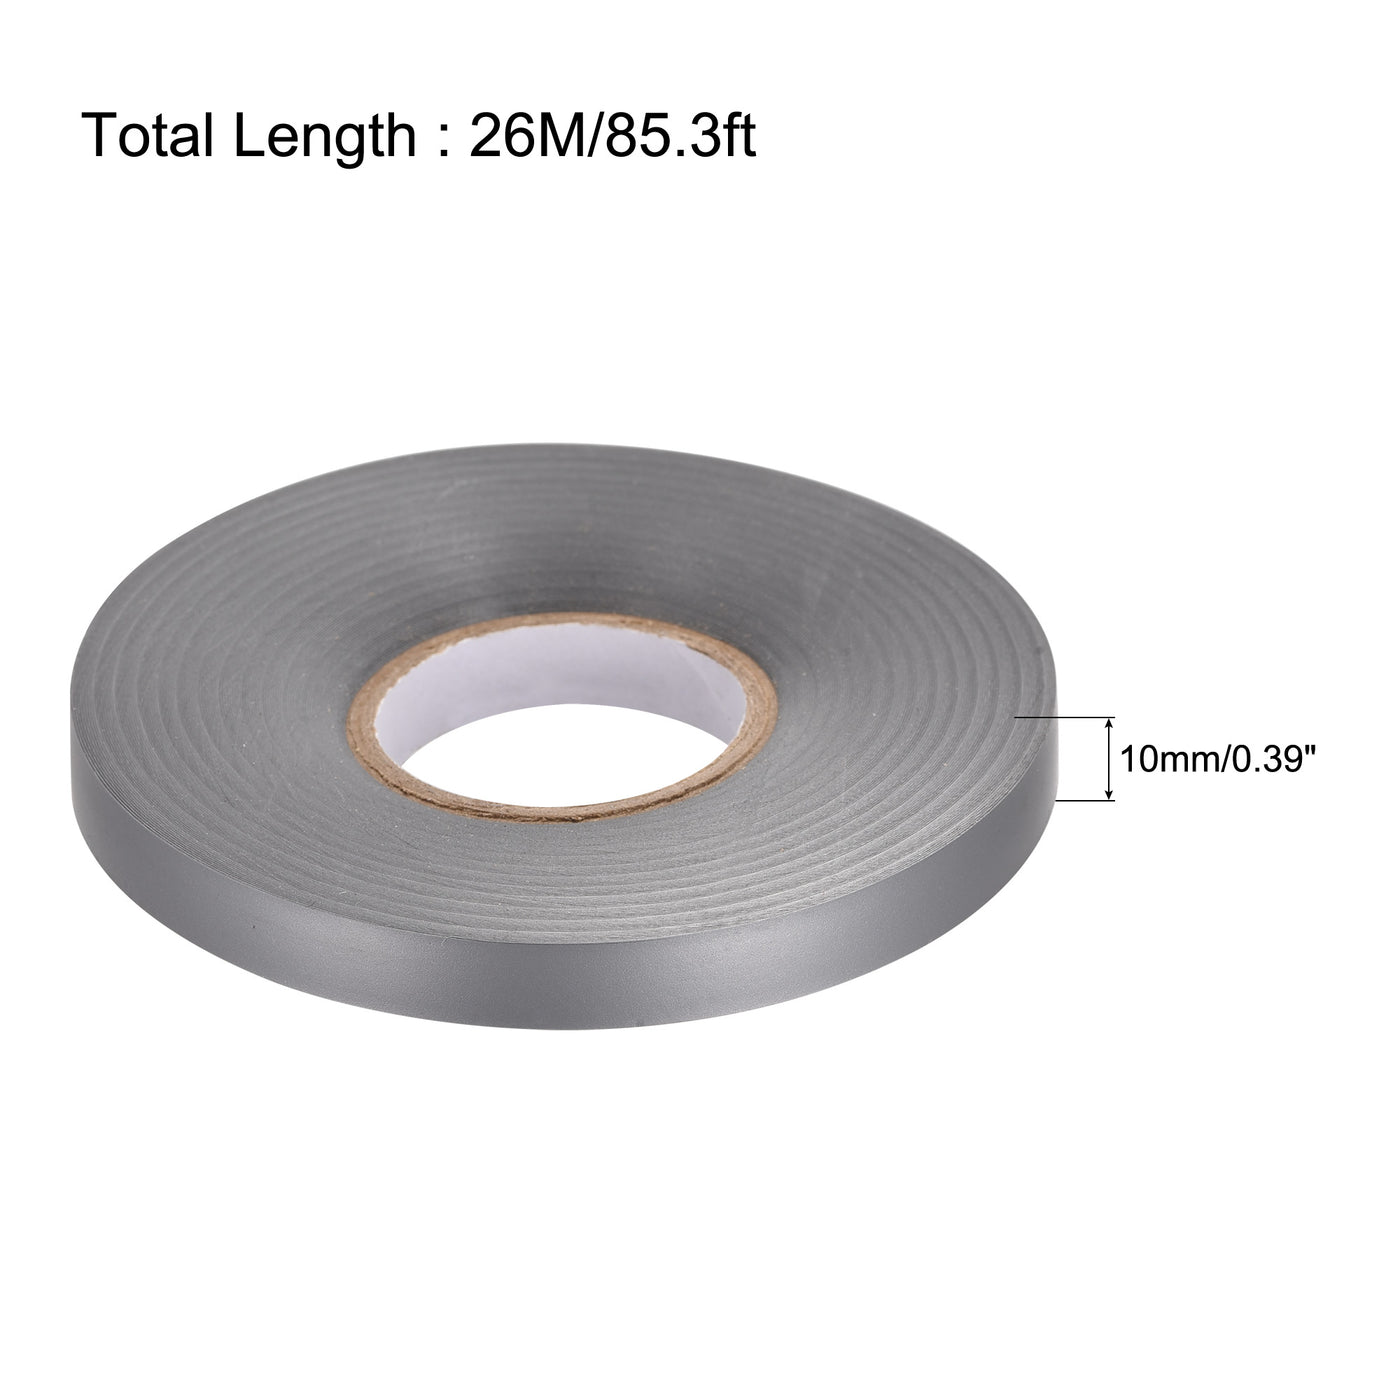 uxcell Uxcell Insulating Tape 10mm Width 26M Long 0.26mm Thick PVC Electrical Tape Grey 3pcs